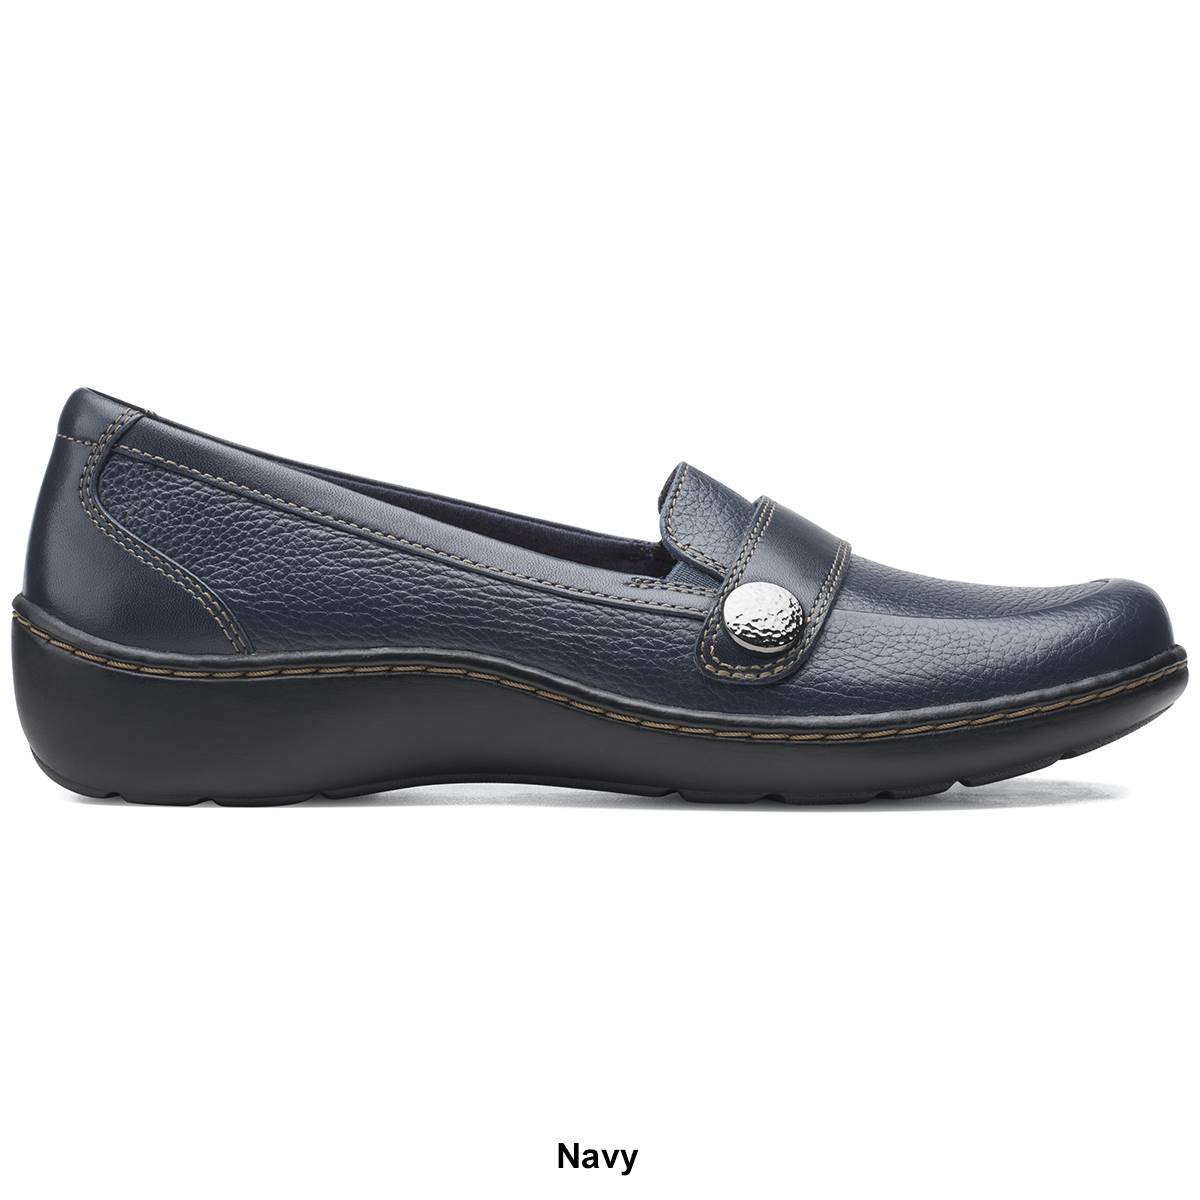 Womens Clarks(R) Cora Daisy Solid Loafers